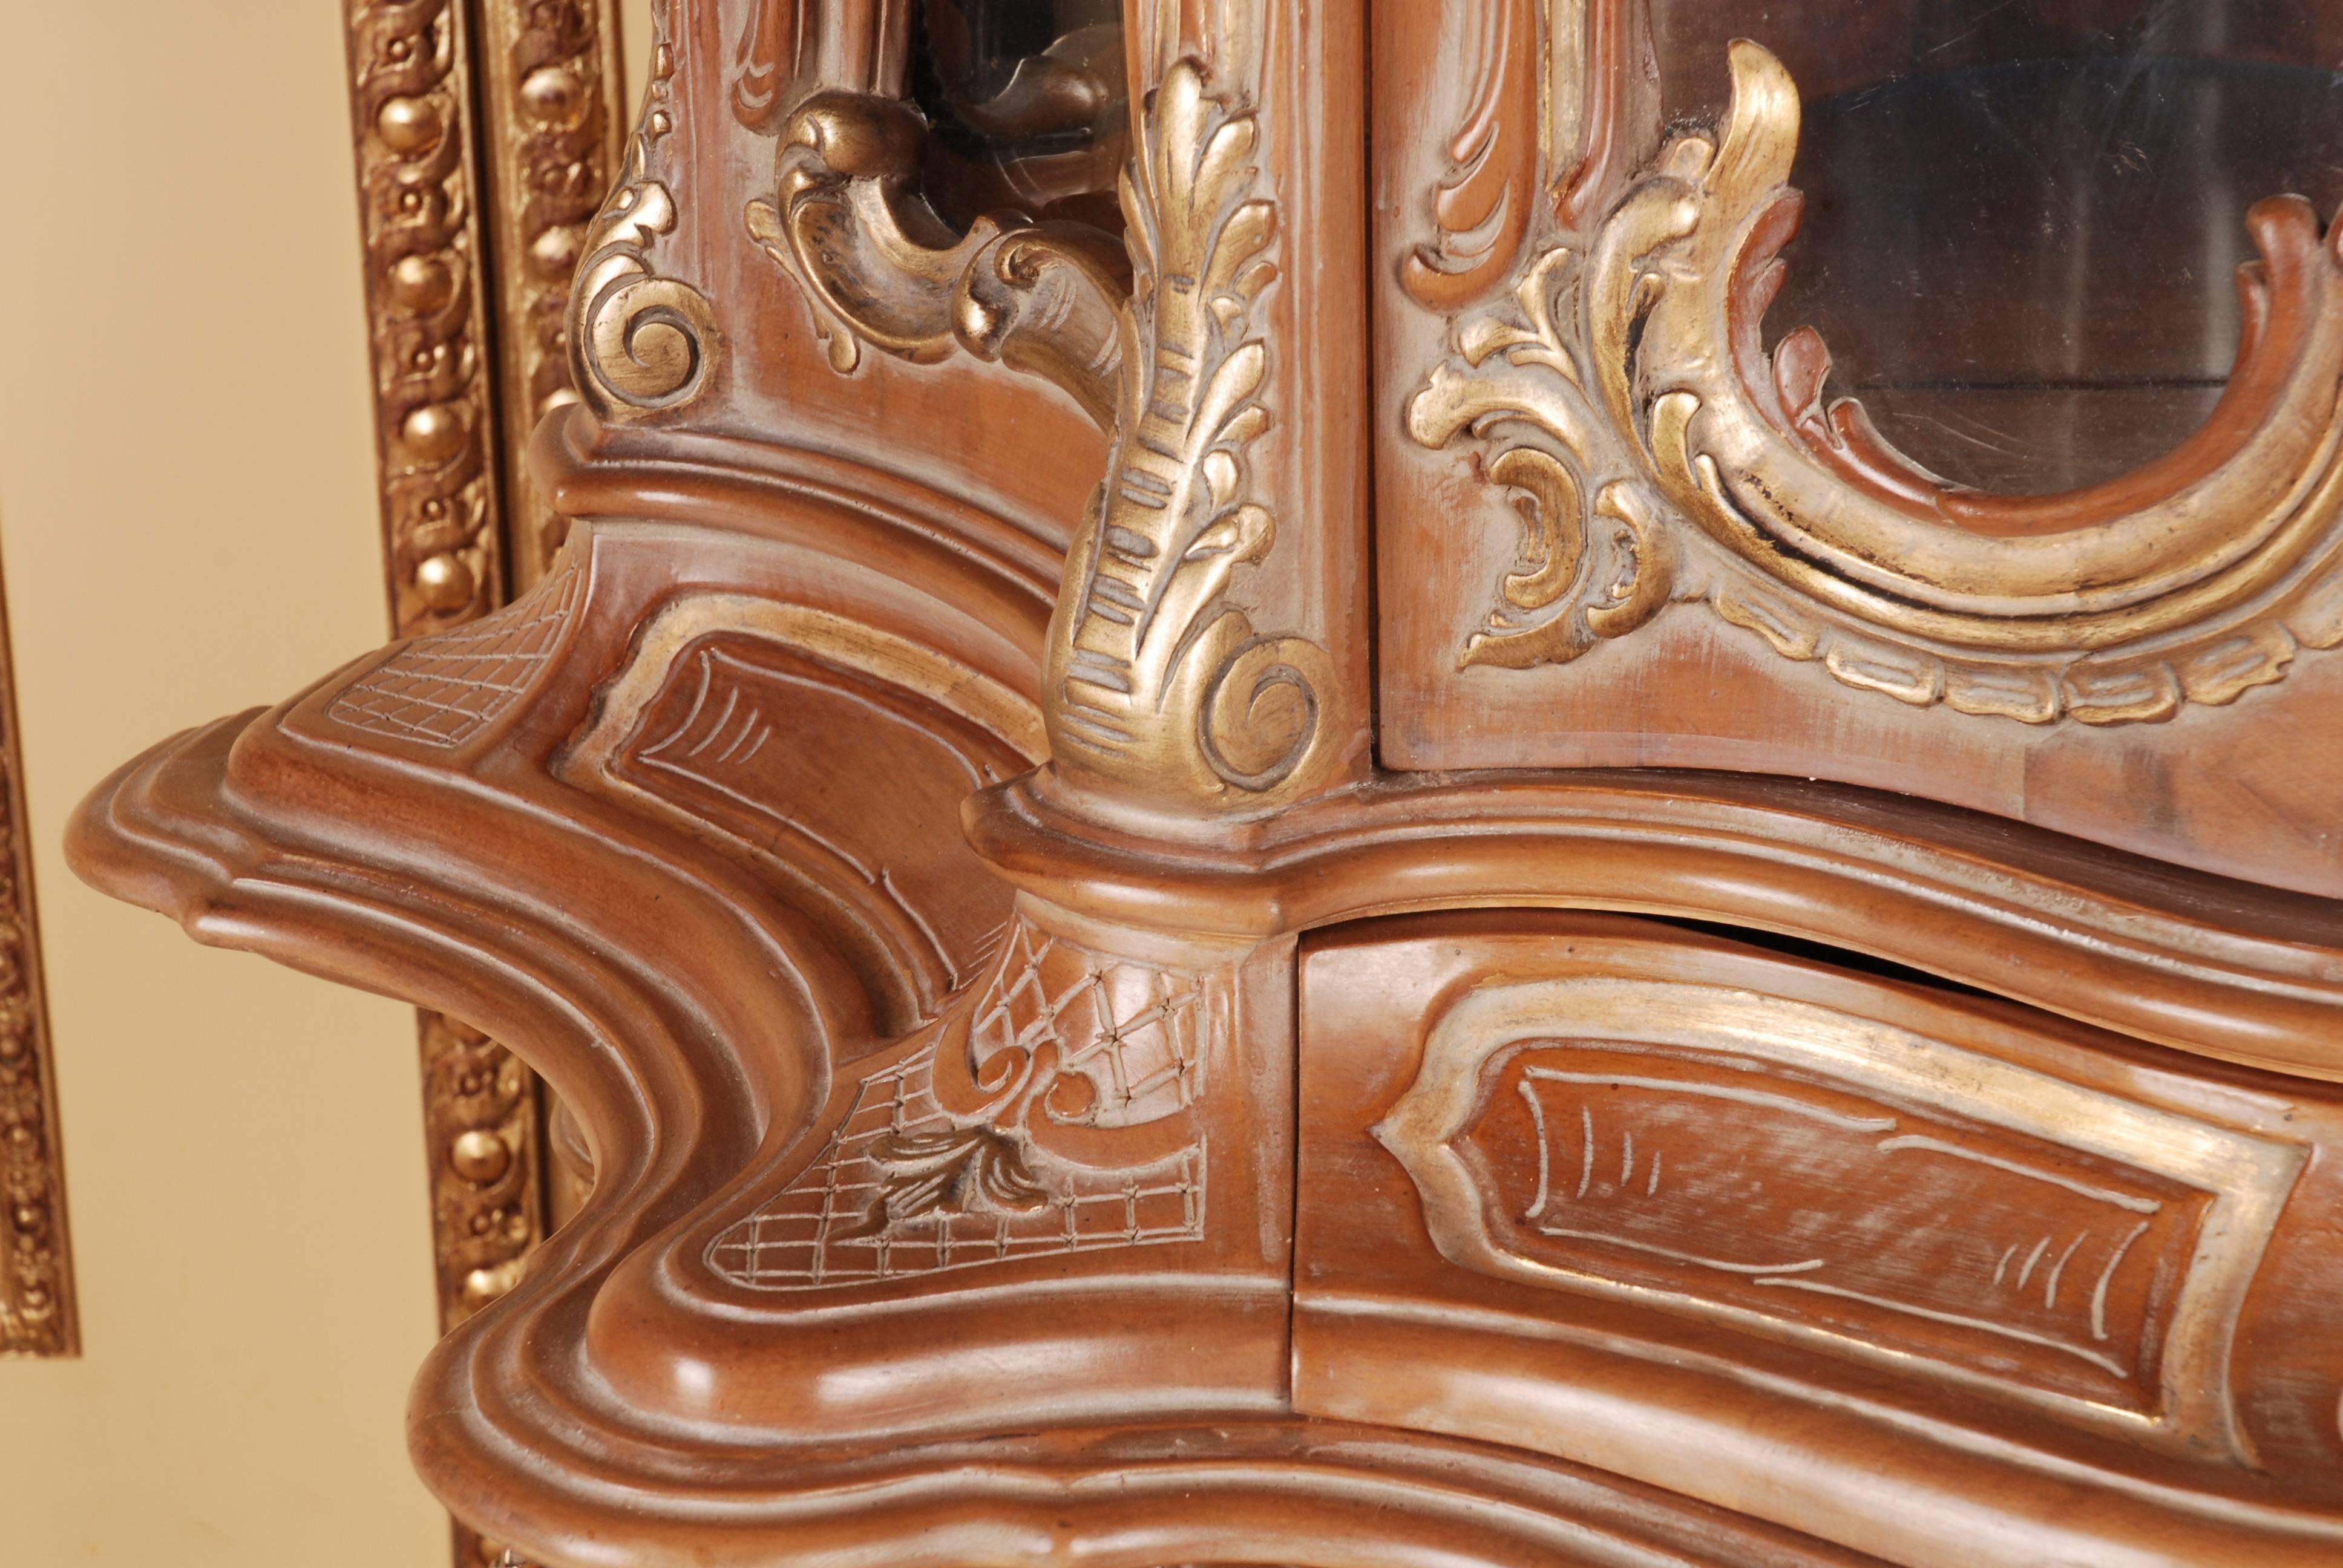 Hand-Carved 20th Century Splendid Display Cabinet in the Rococo Style